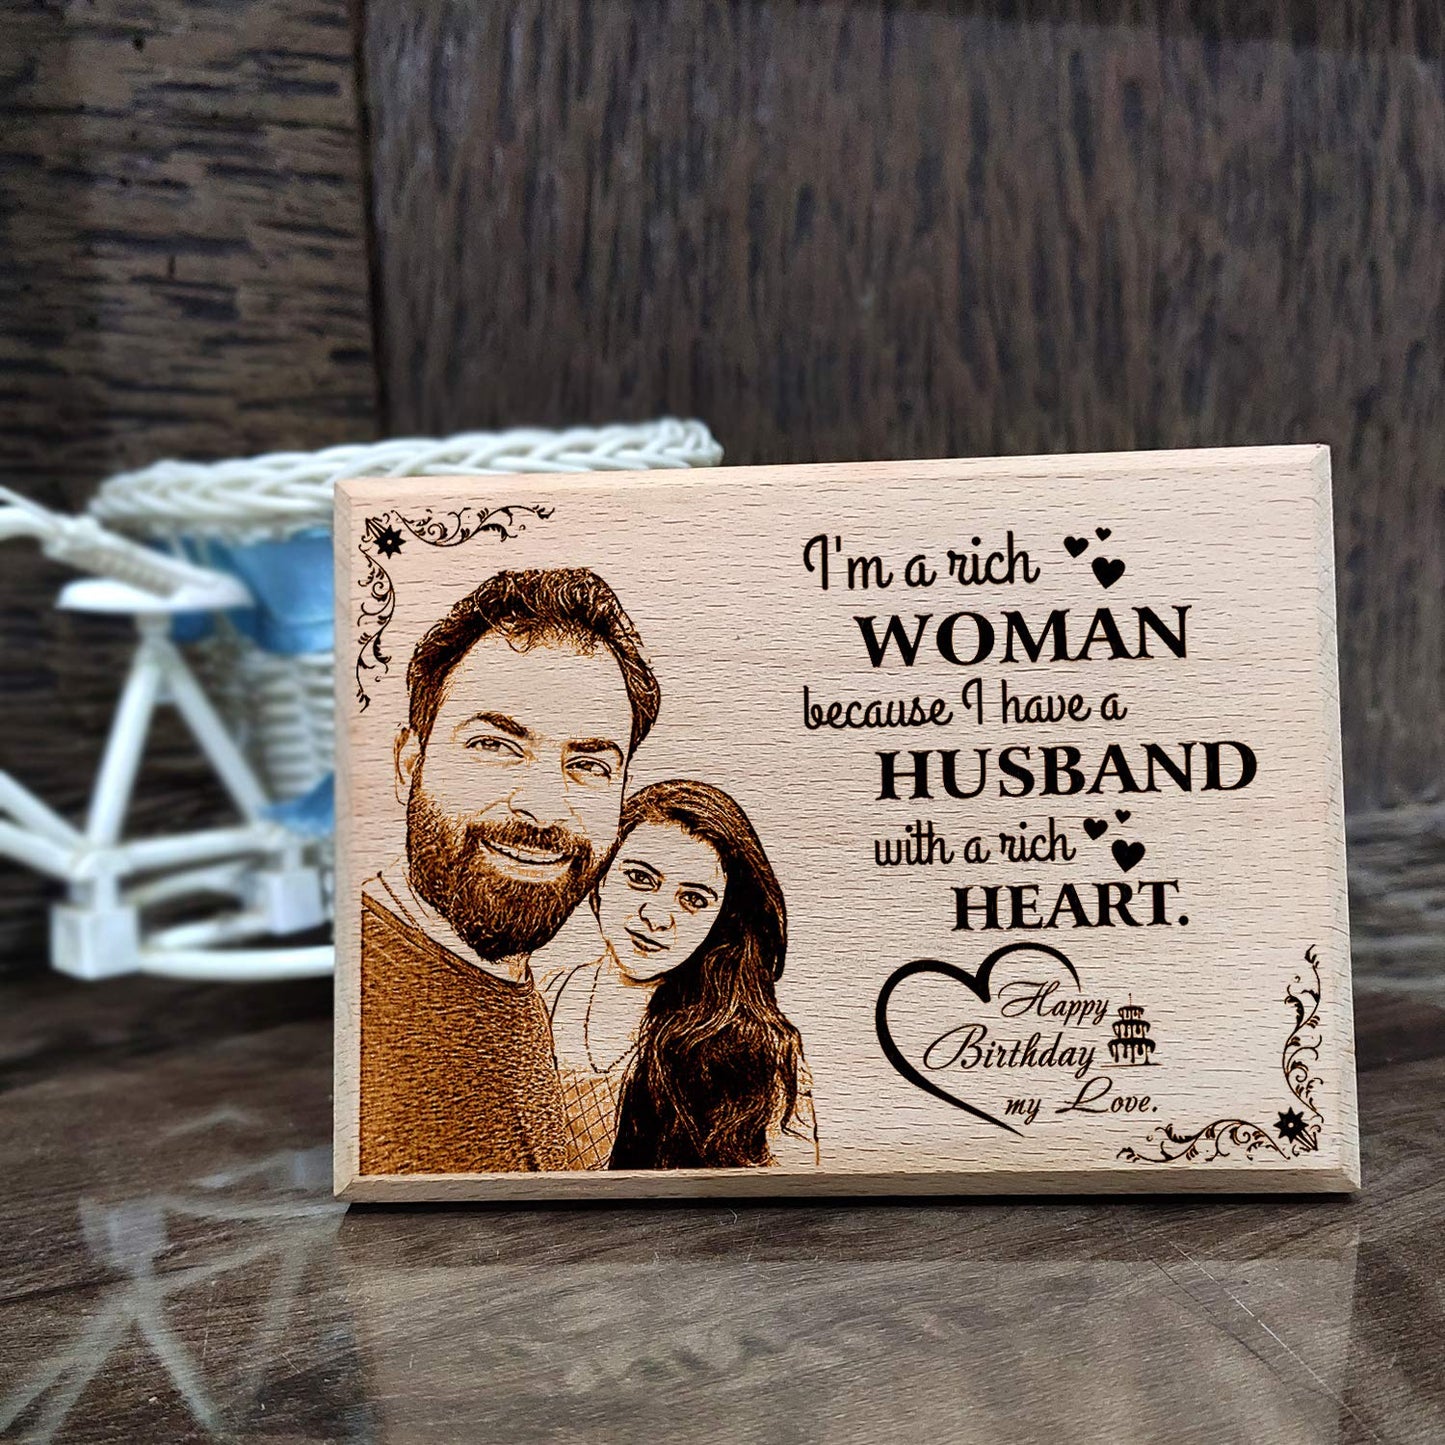 Personalized Engraved Wooden Photo Plaque Birthday Gift for Him or Her (7×4 in)